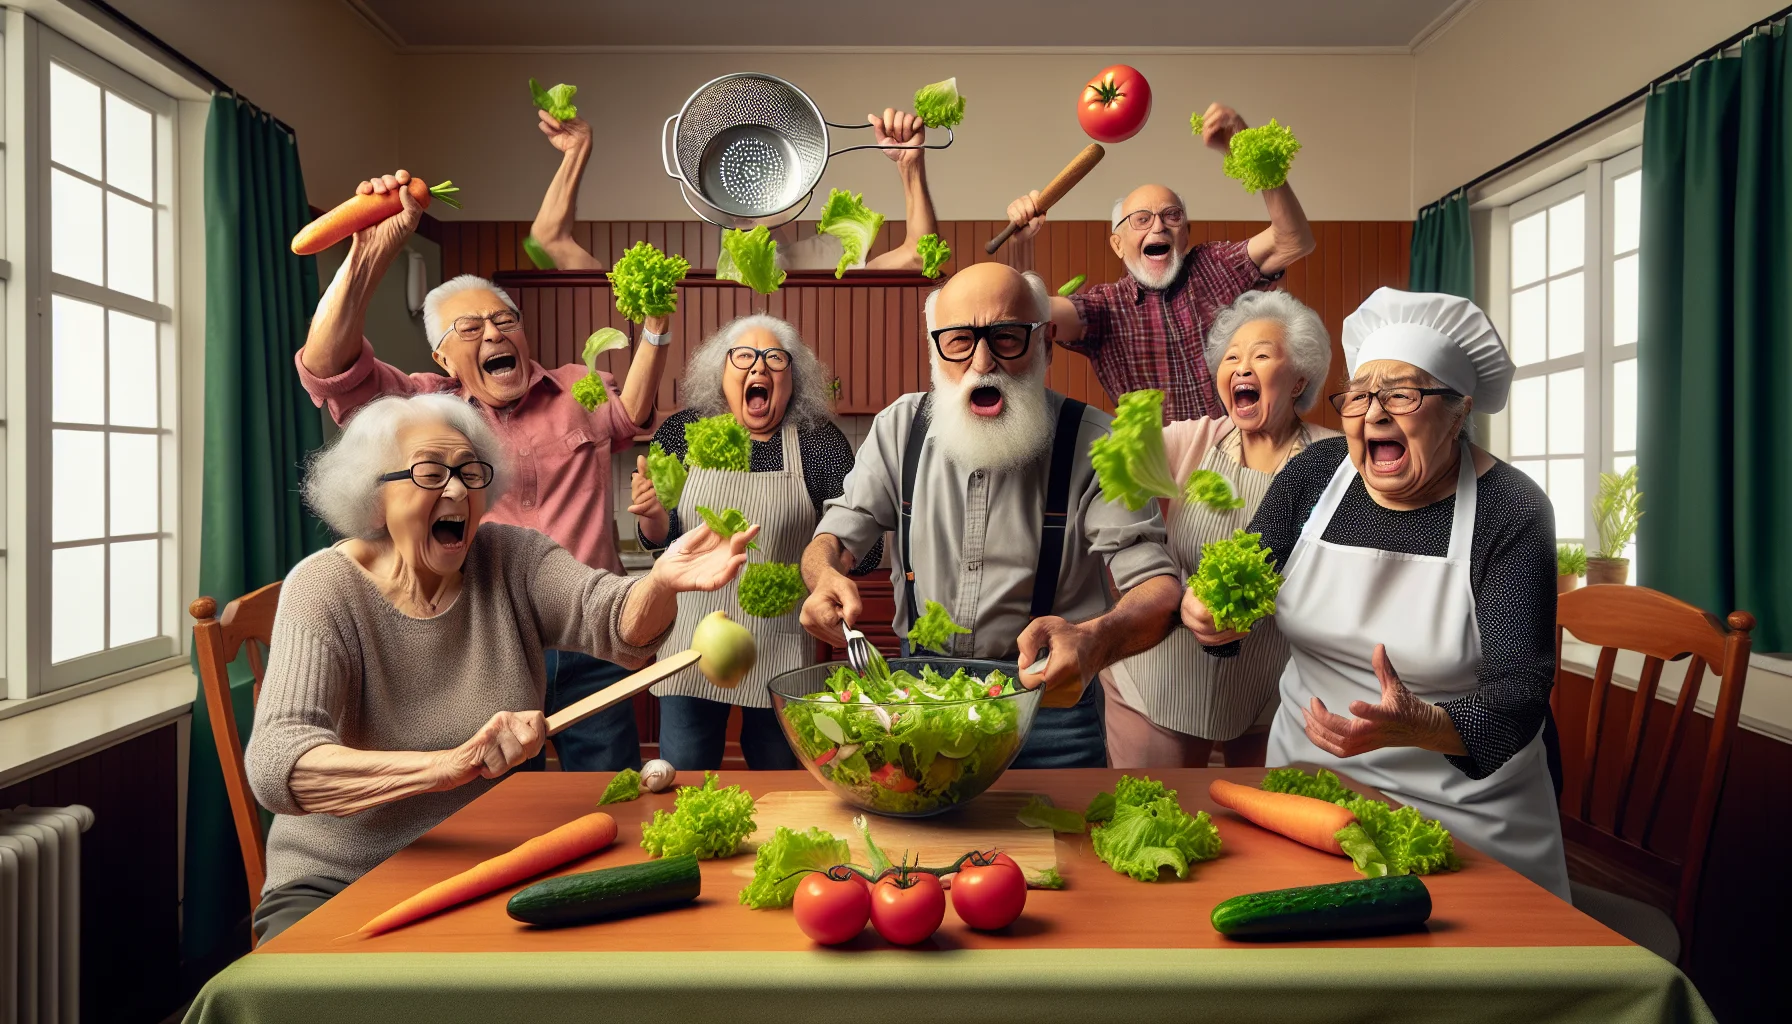 Create a humorous, realistic image that showcases a heart-healthy diet suitable for seniors with diabetes. Envision a scene in a retirement home where a lively group of old friends are engaged in a playful 'salad making competition'. Imagine they've turned the activity into a joyous mess with lettuce flying everywhere, with each participant holding a vegetable like a weapon. The participants include a Middle-Eastern old man humorously using a cucumber as a sword, a Black elderly woman donning a colander as a helmet, a Hispanic grandmother wielding a carrot like a maestro's baton, and a White aged gentleman wearing glasses, trying to seize a tomato like a cricket ball.